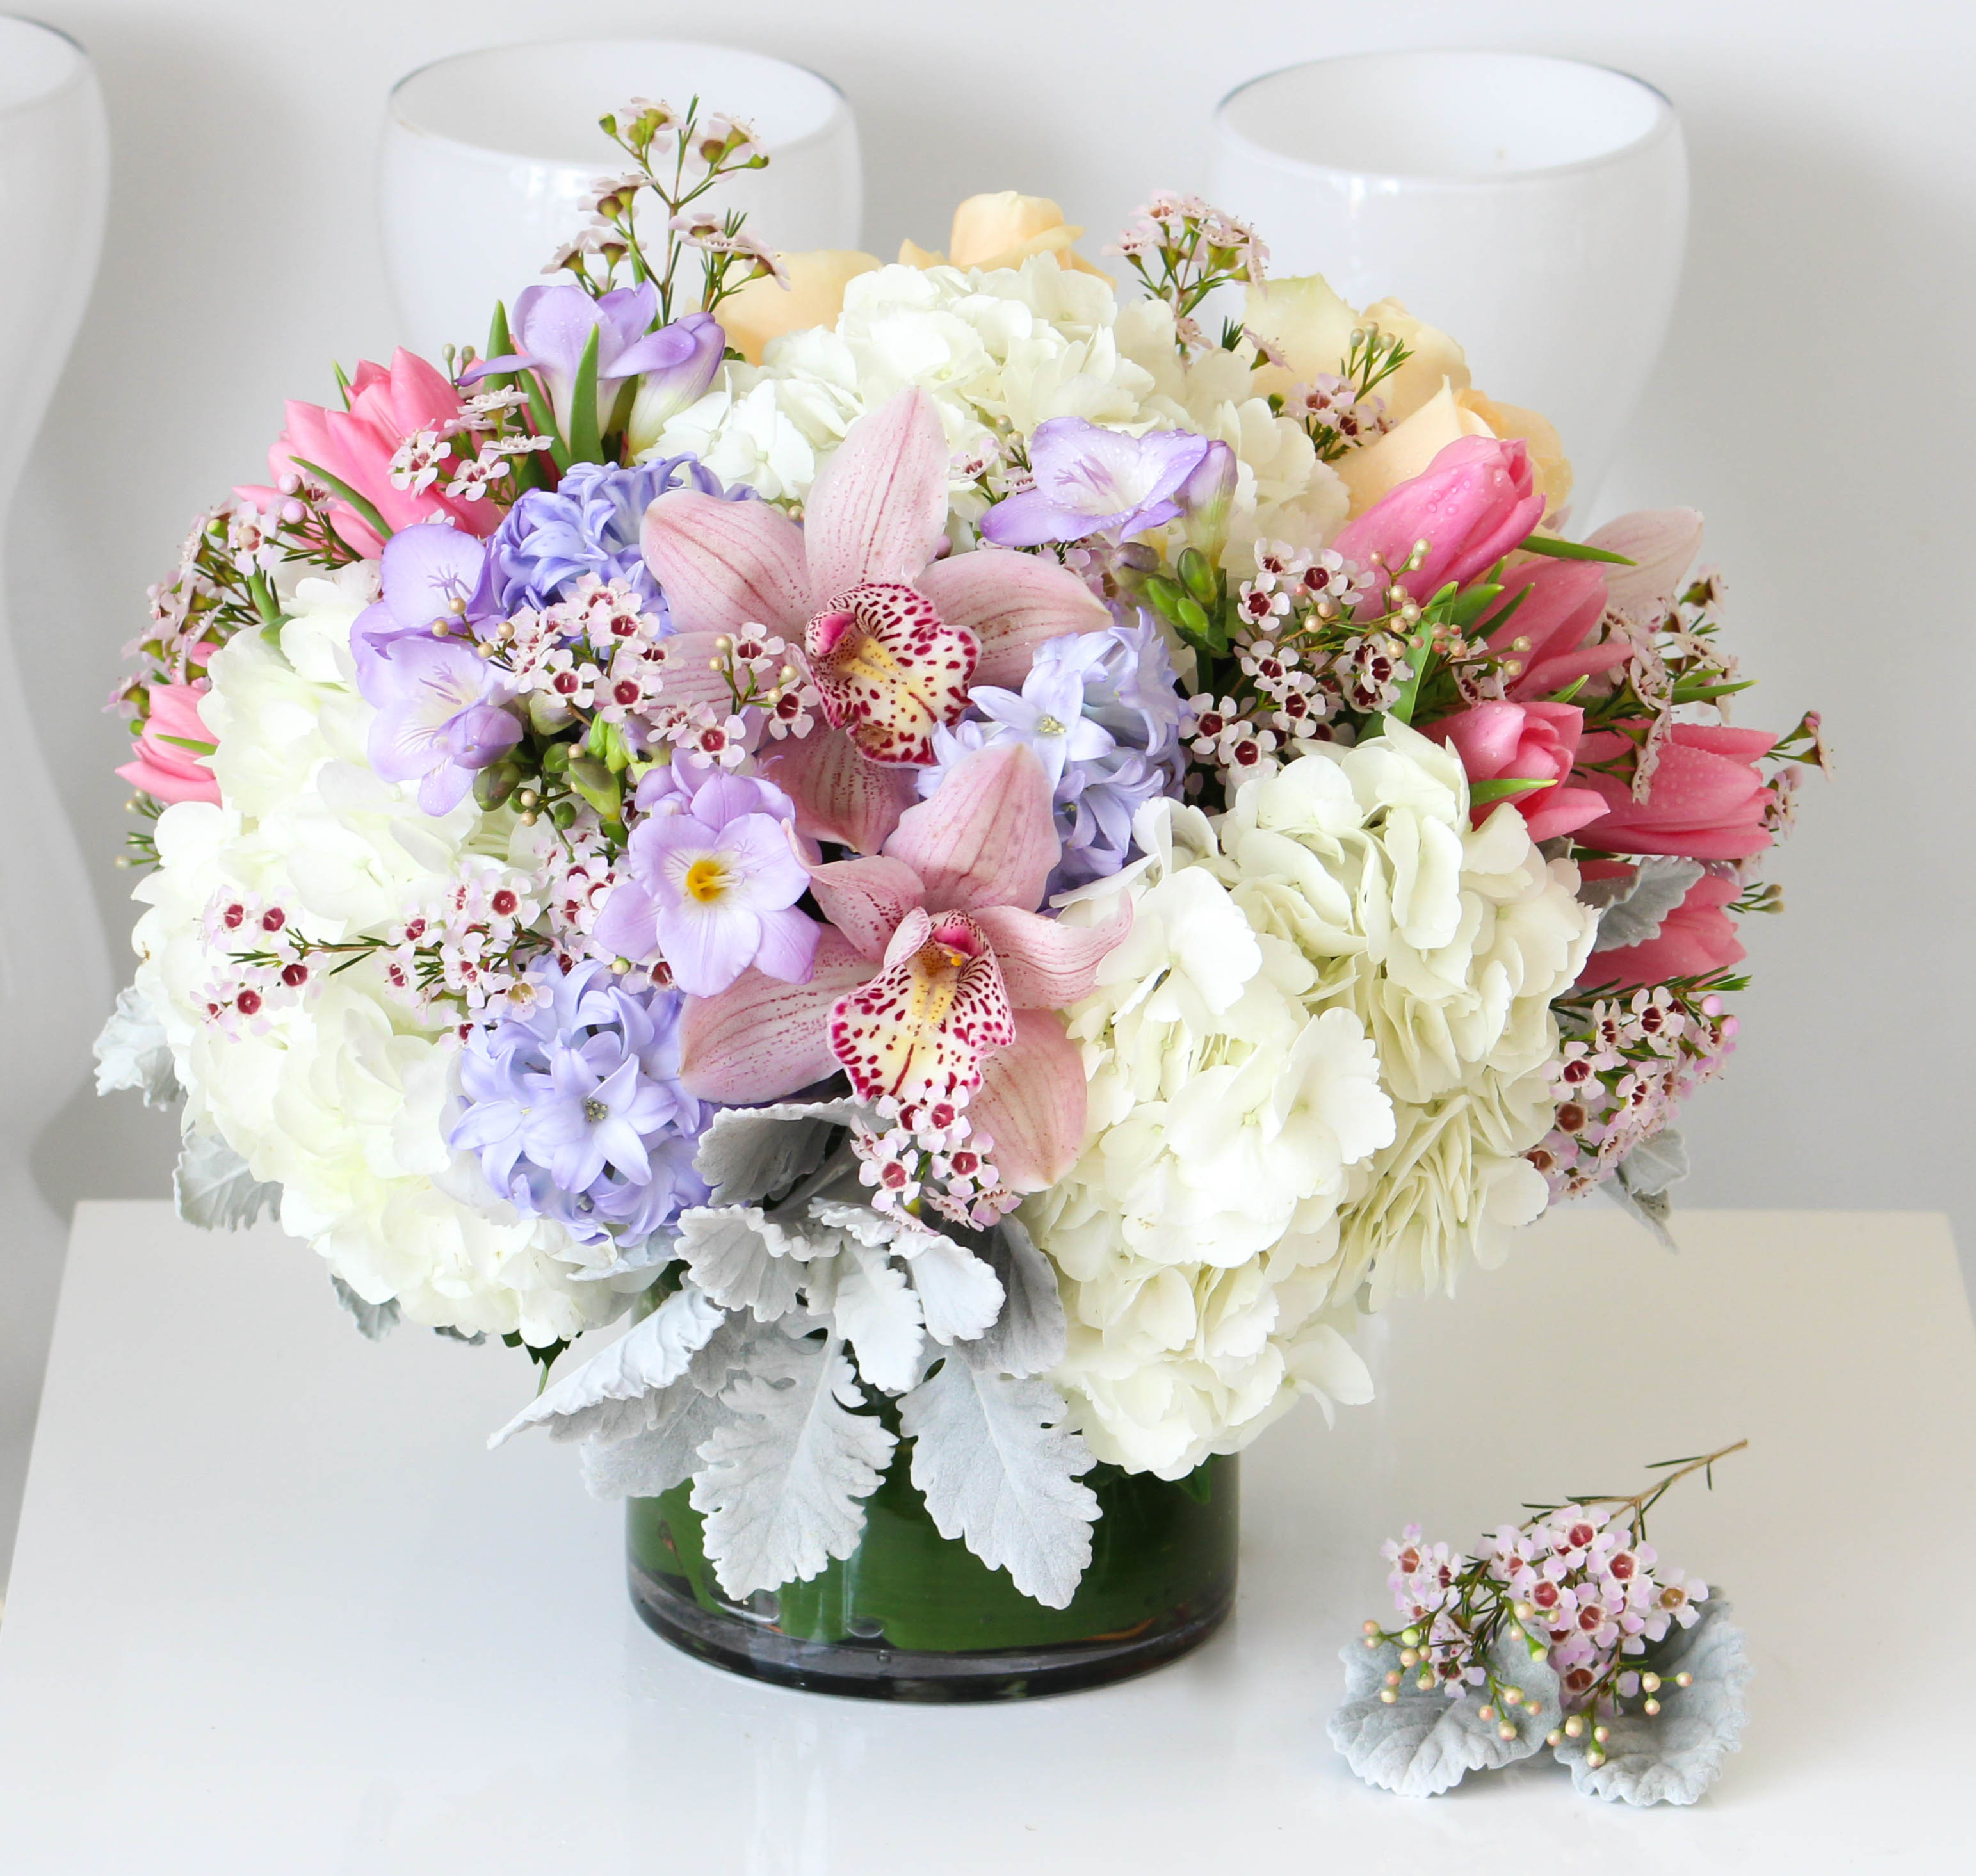 Los Angeles Florist | Flower Delivery by Sonny Alexander Flowers